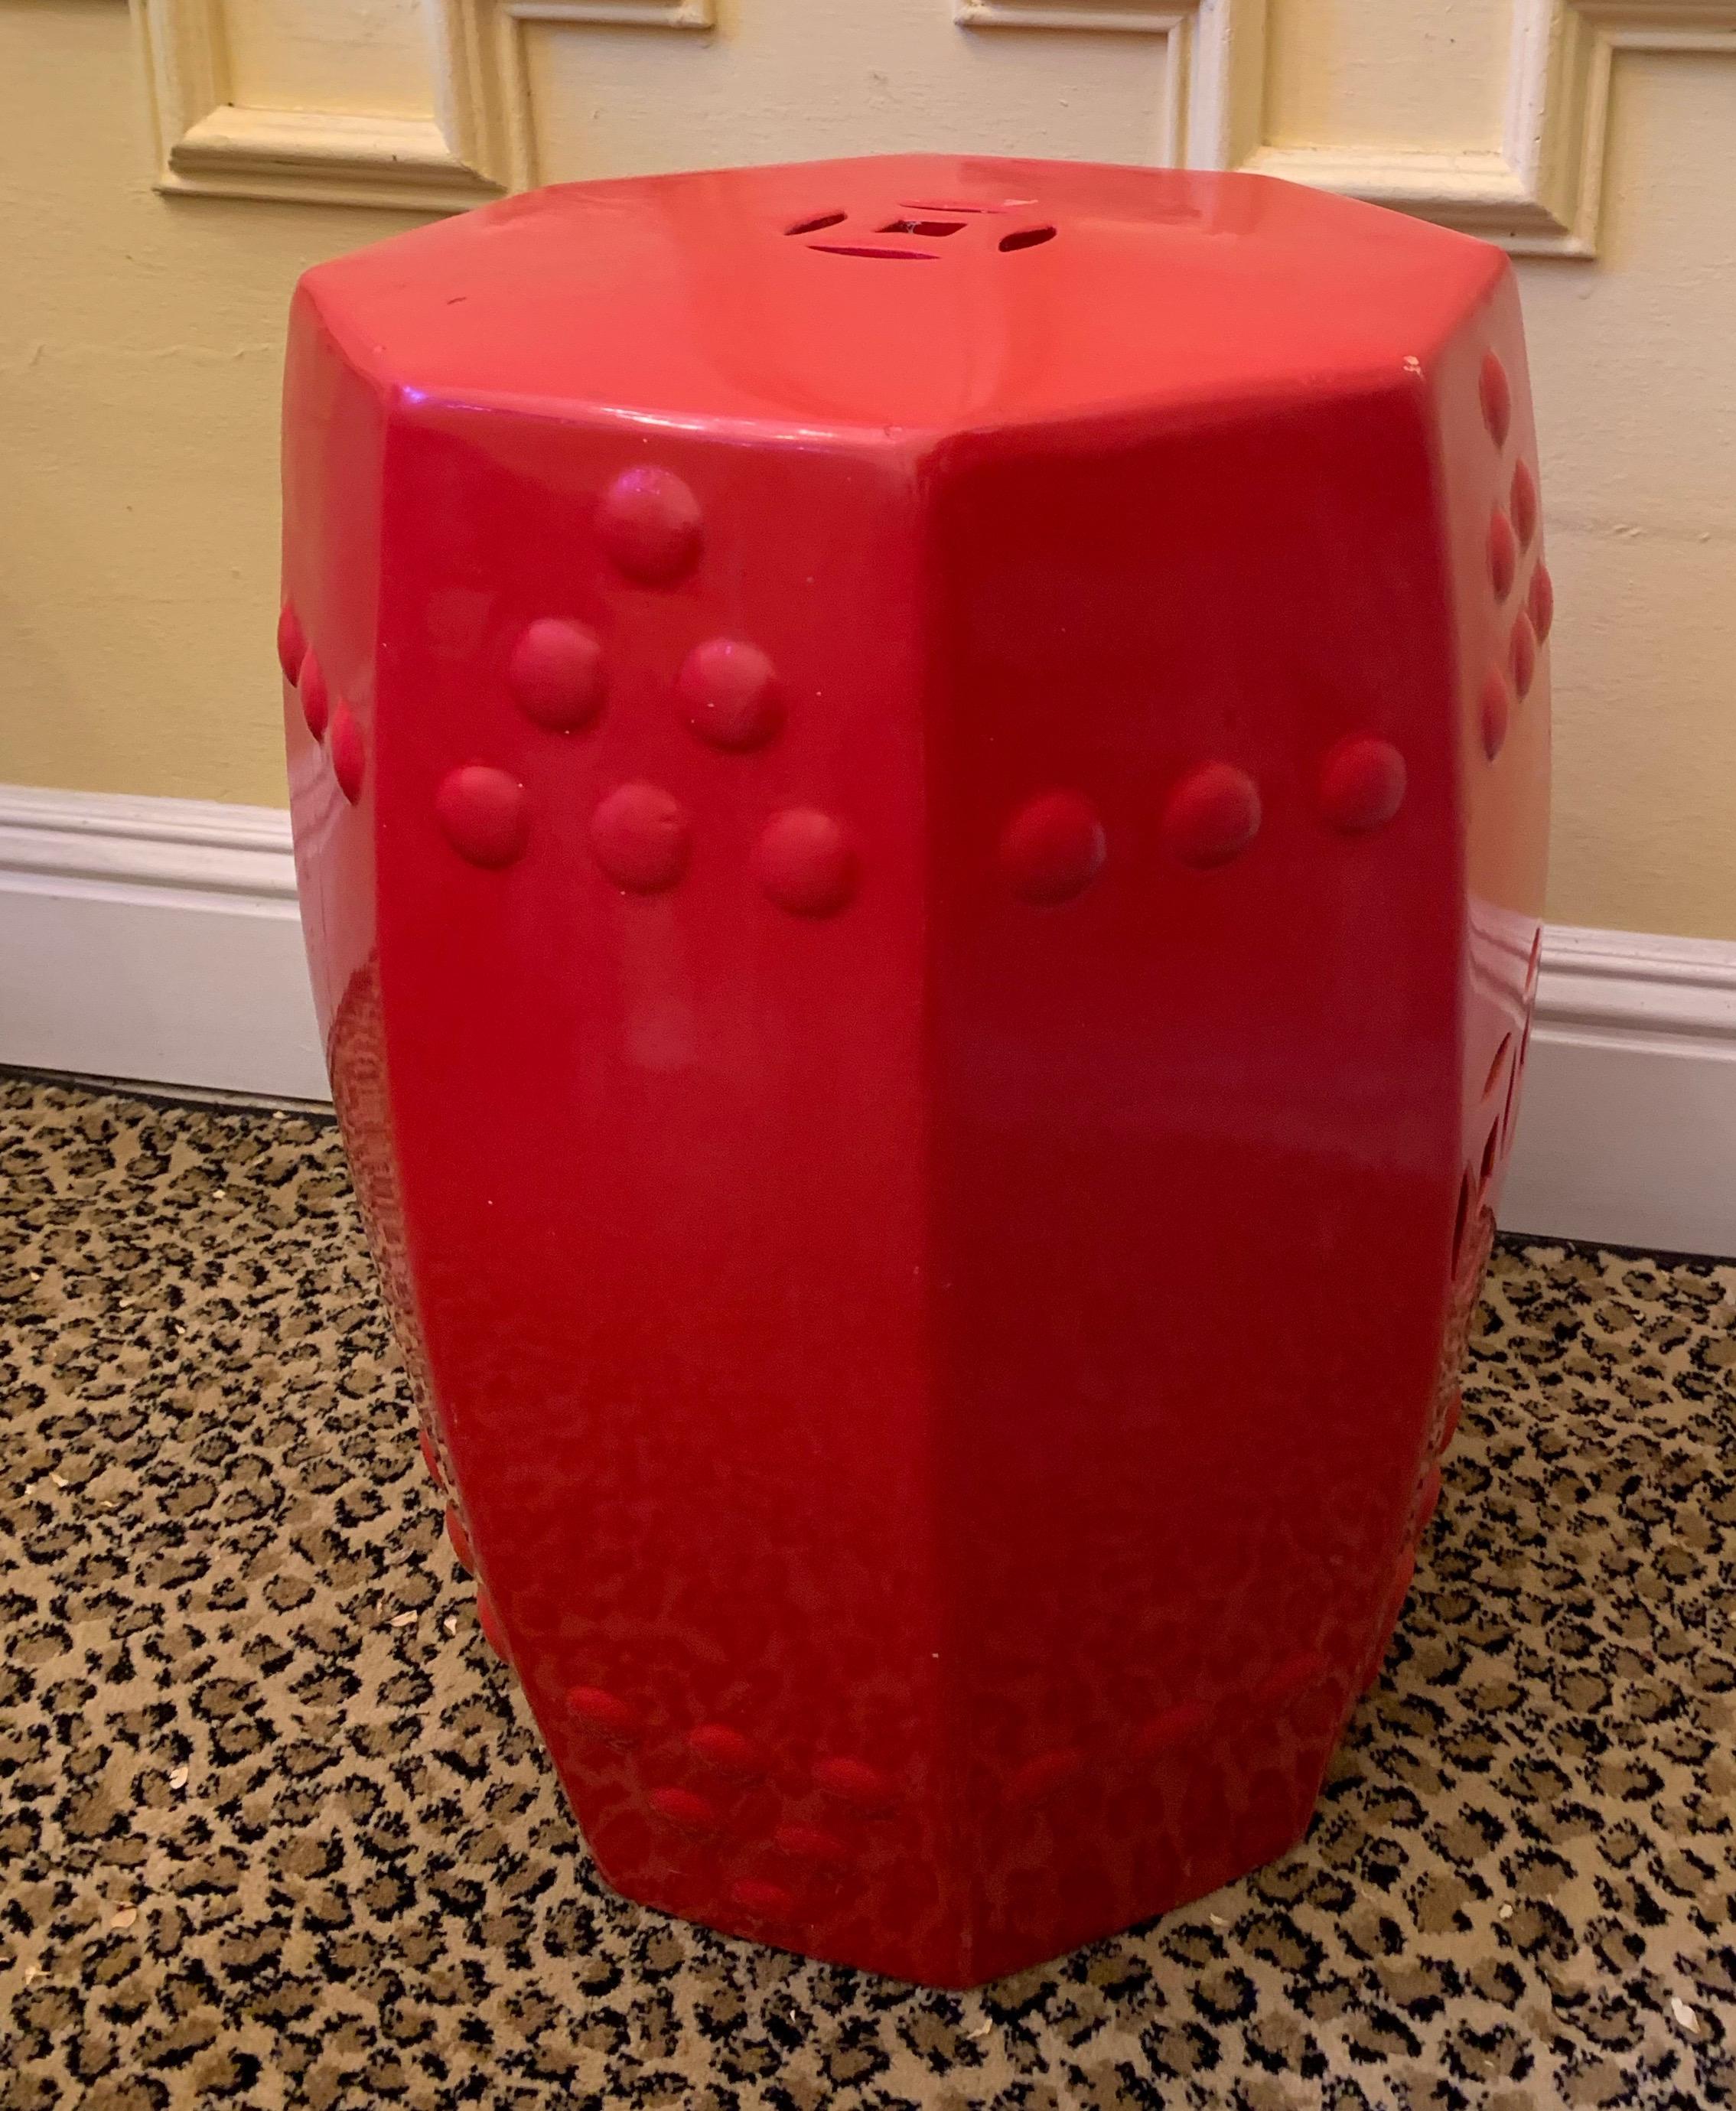 Red ceramic garden stool side table - red, the color of good luck, peace and joy is a wonderful contrast to the bold vibrant and green colors of the garden, and also becomes a practical focal point in the home - welcoming. A great piece for adding